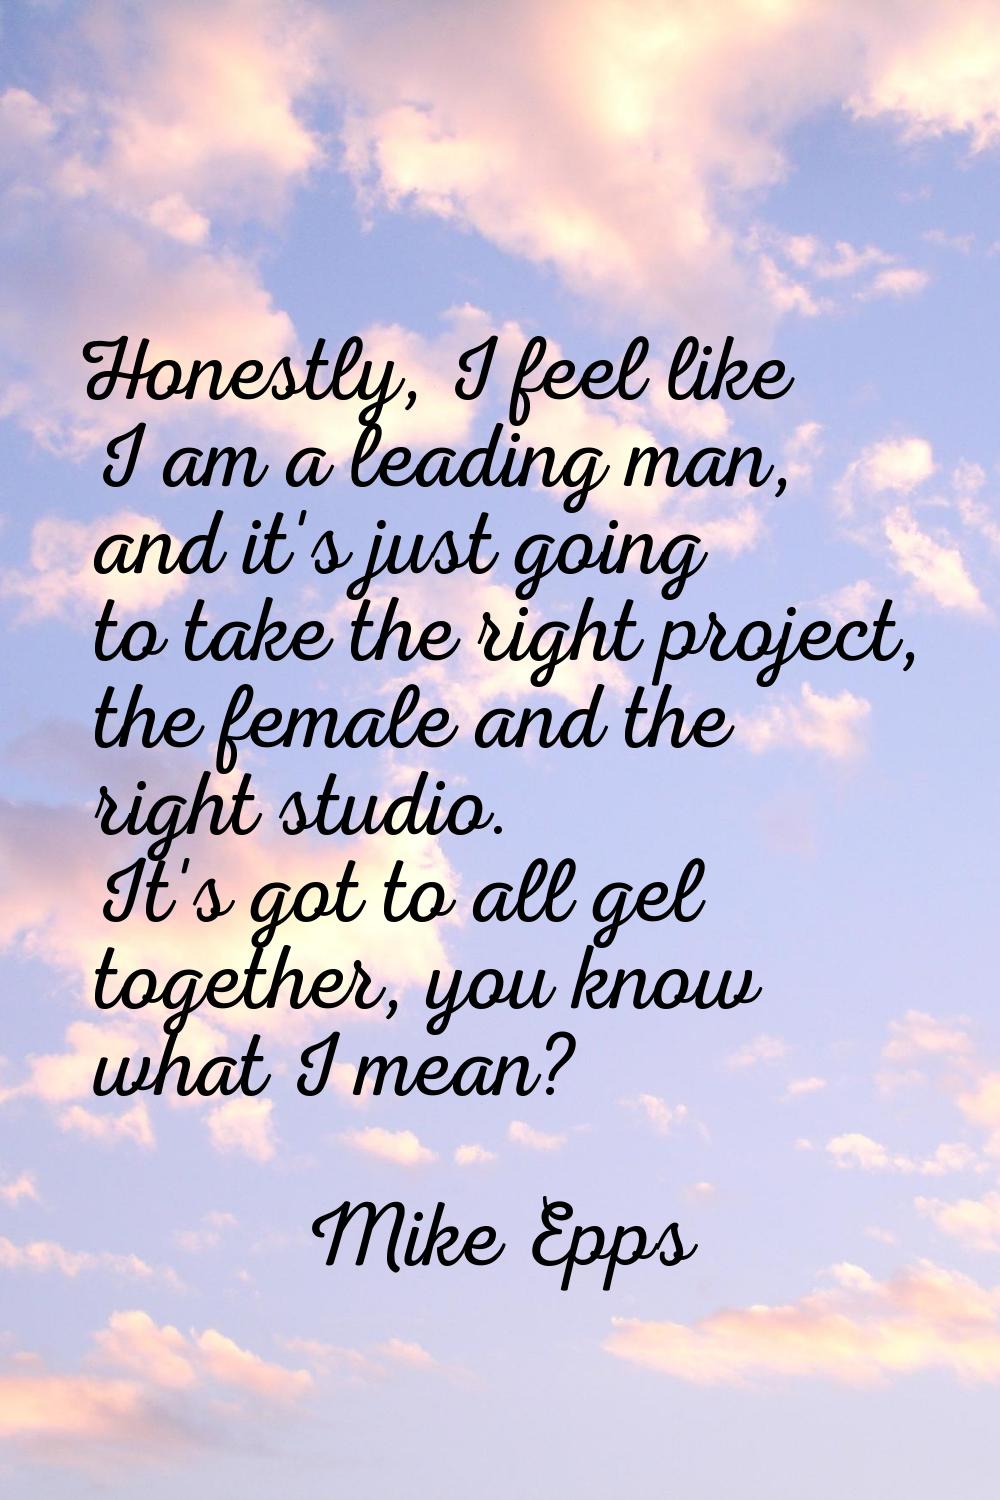 Honestly, I feel like I am a leading man, and it's just going to take the right project, the female